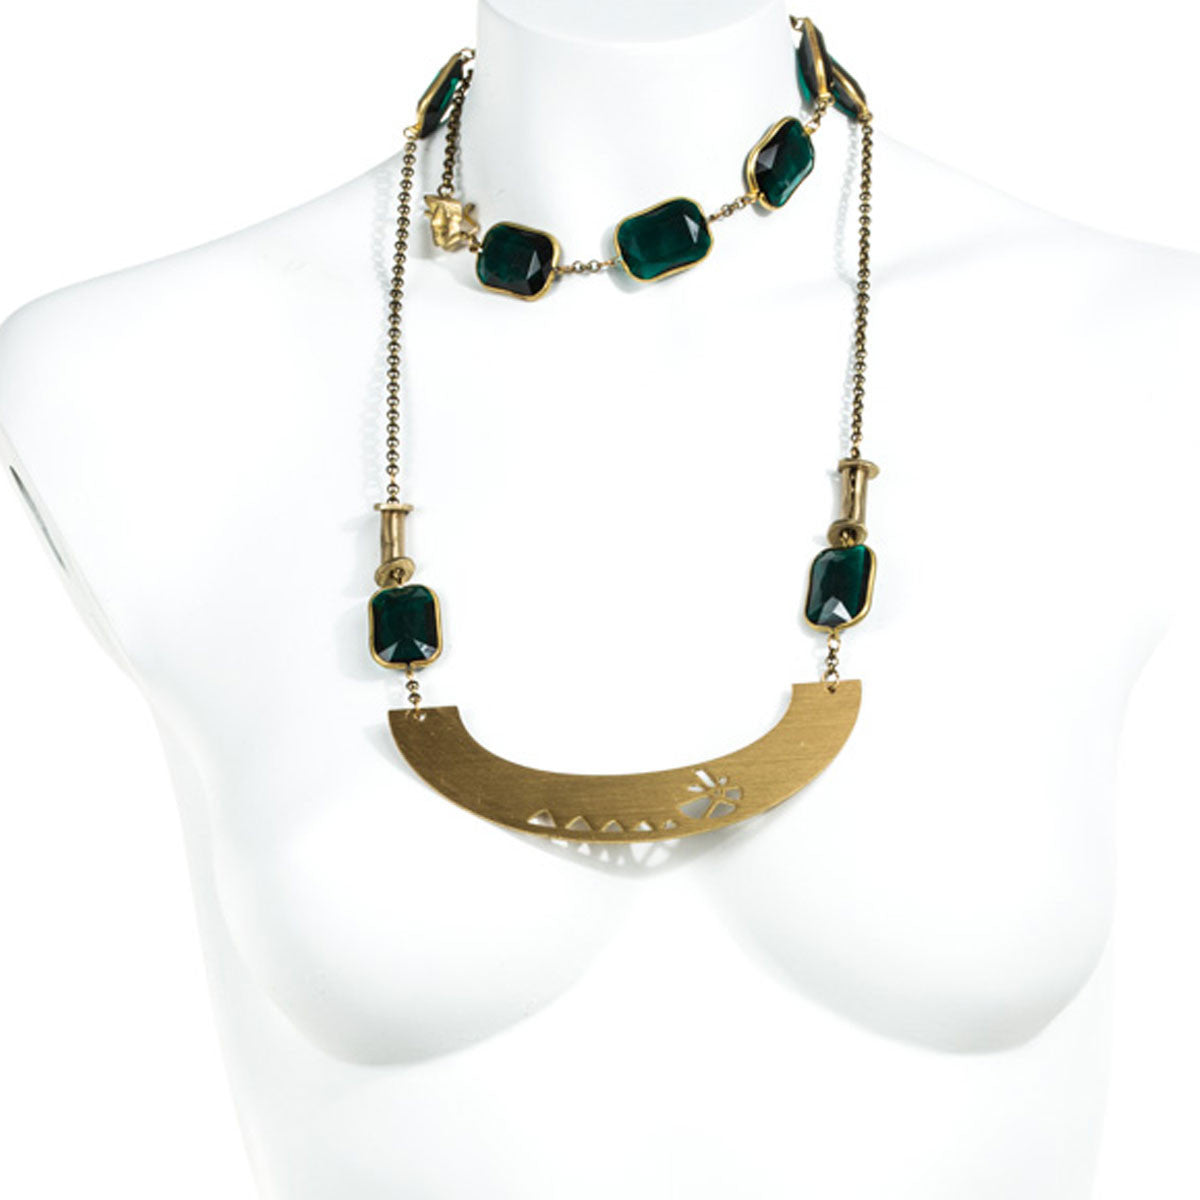 ARCH AND EMERALD LUCITE